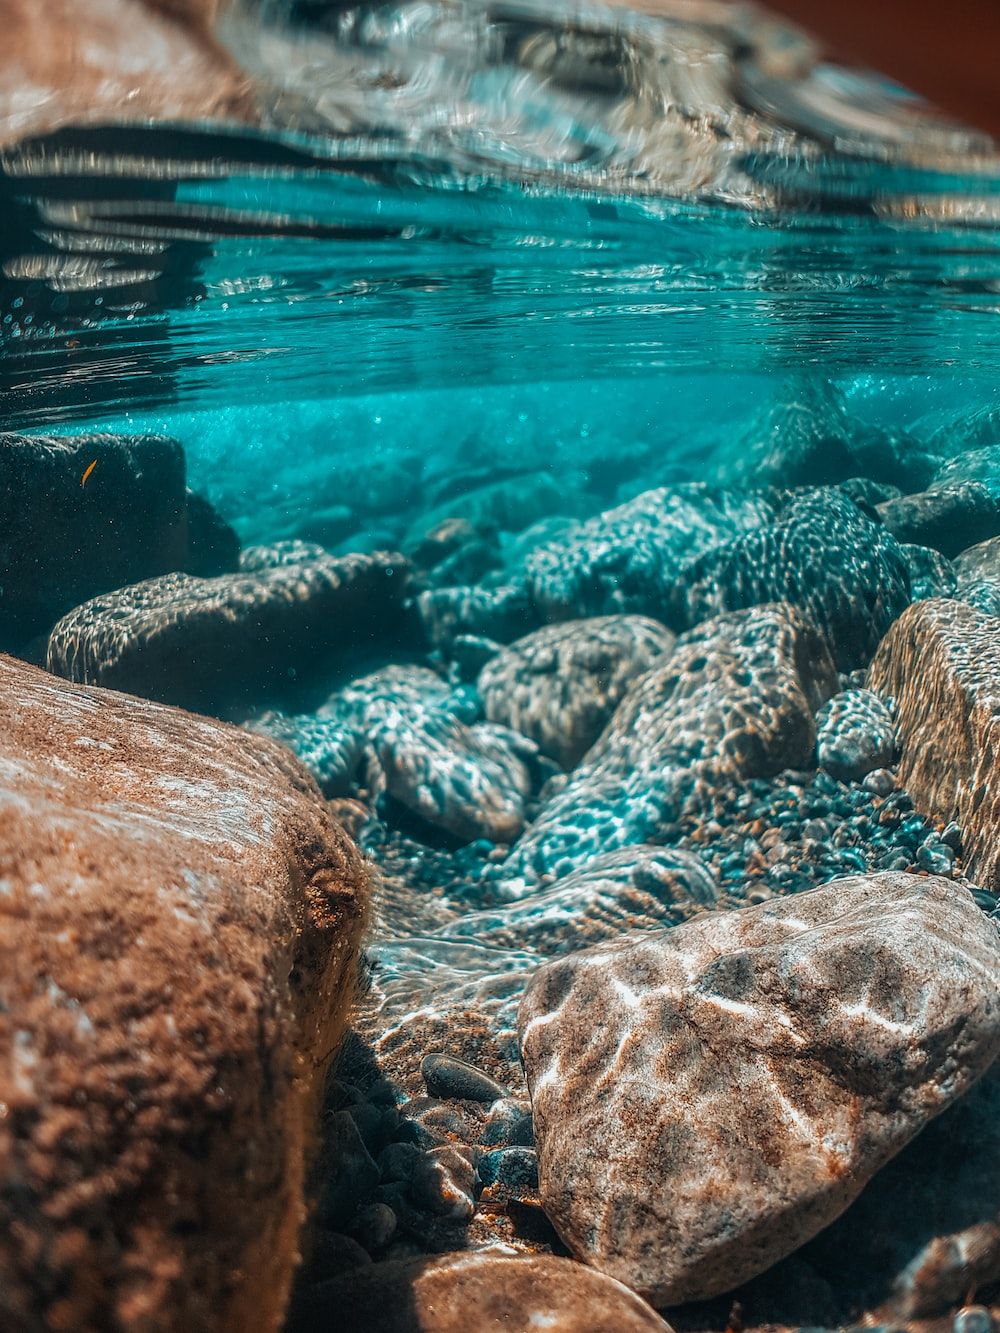 A view of rocks and water from under the surface - Underwater